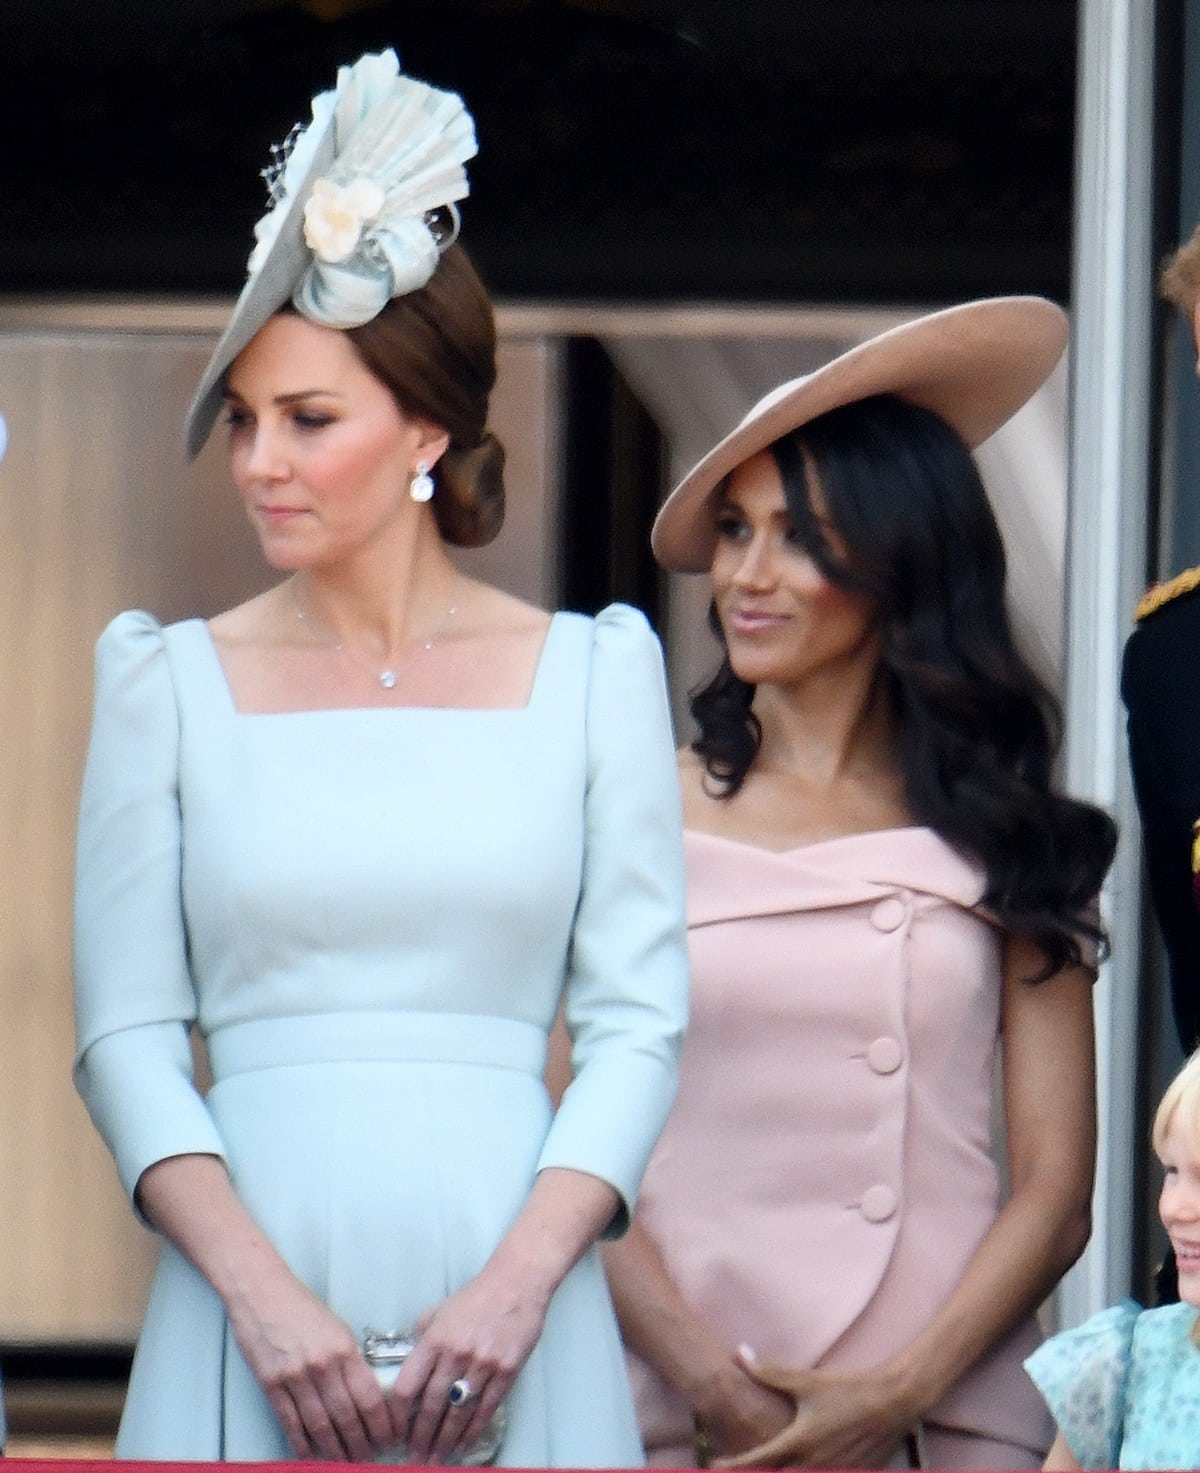 Kate Middleton is taller, with a height of 5ft 8 ¾ (174.6 cm), compared to Meghan Markle's height of 5ft 5 (165.1 cm)